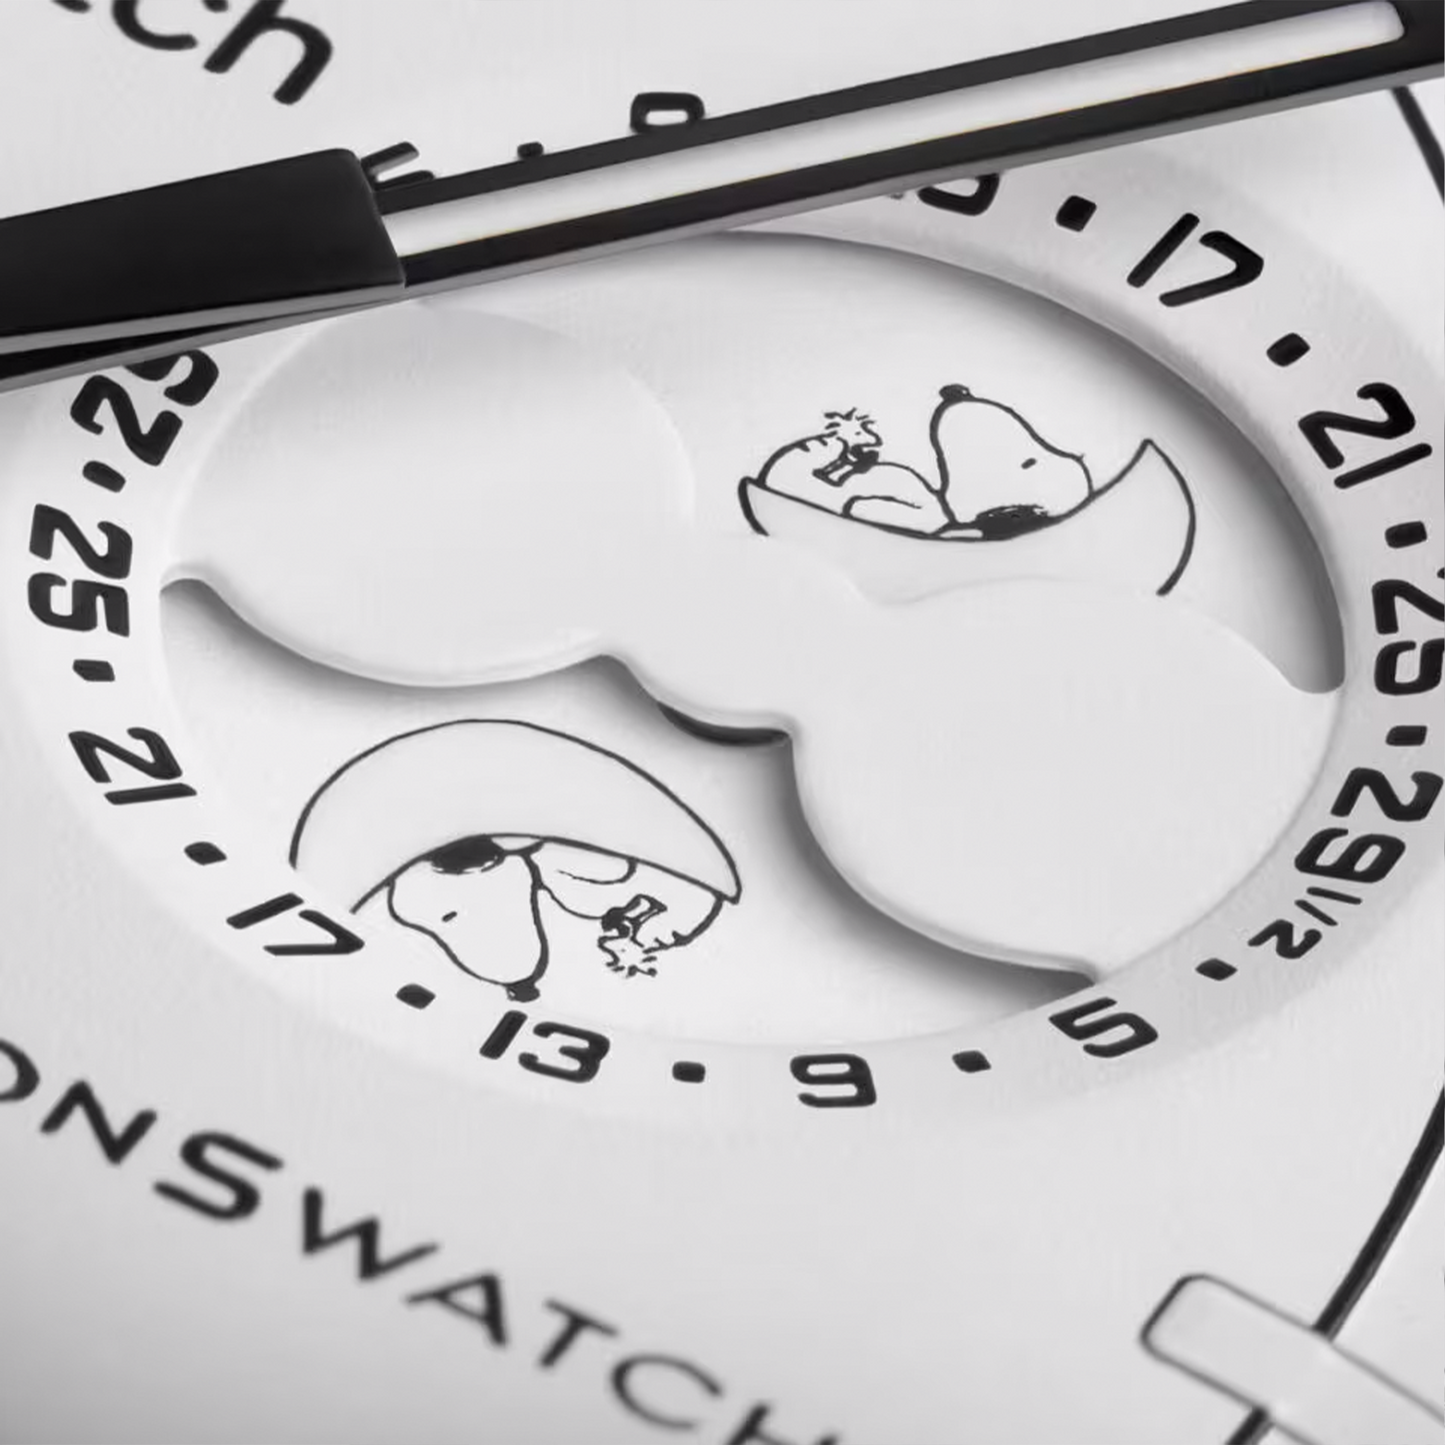 Swatch x Omega Bioceramic Moonswatch Mission To Moonphase Snoopy White